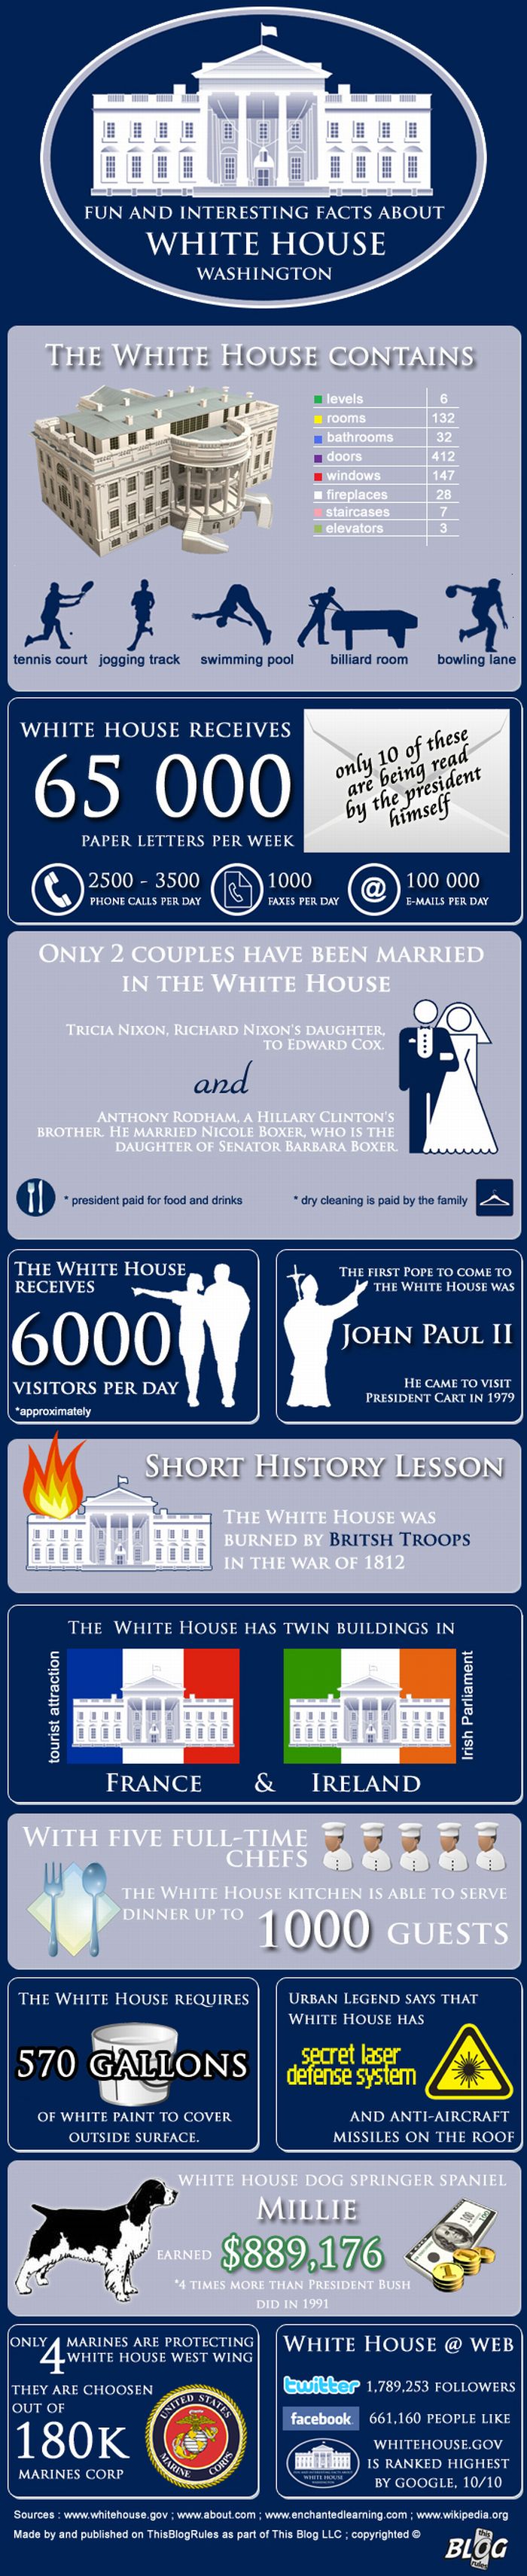 Fun And Interesting Facts About The White House [Infographic]